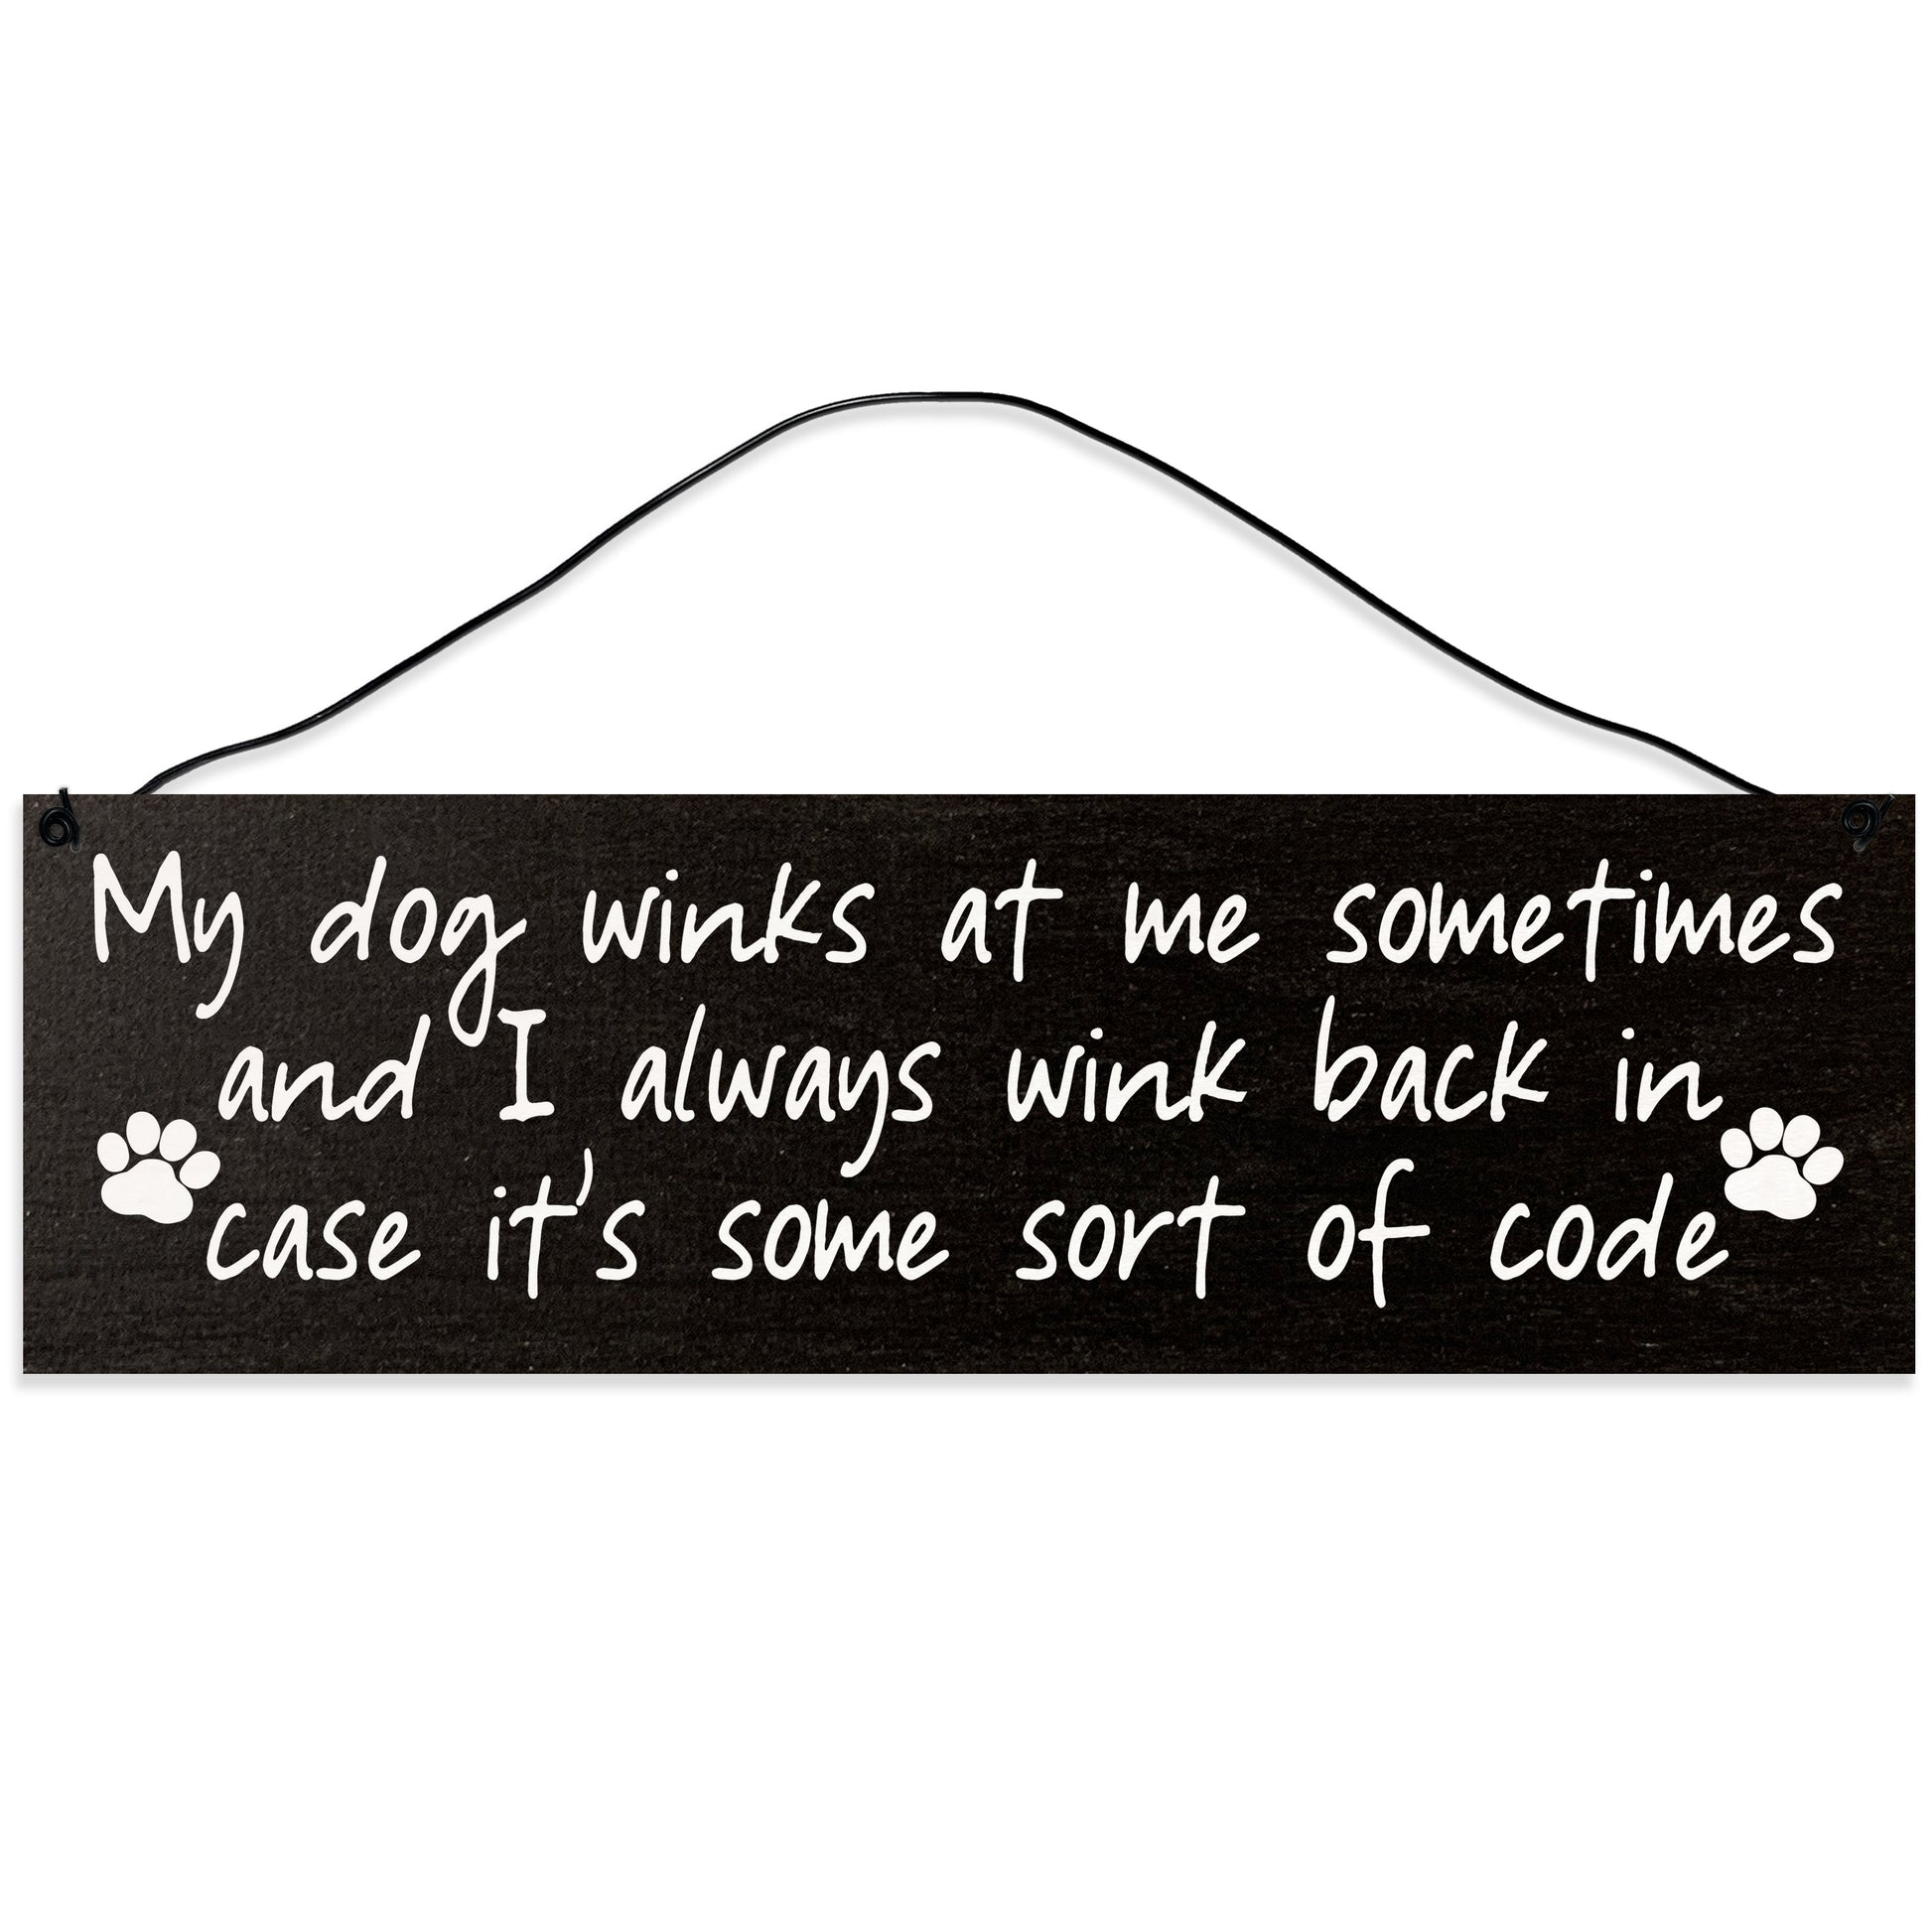 Sawyer's Mill - My Dog Winks at Me Sometimes. Wood Sign for Home or Office. Measures 3x10 inches.